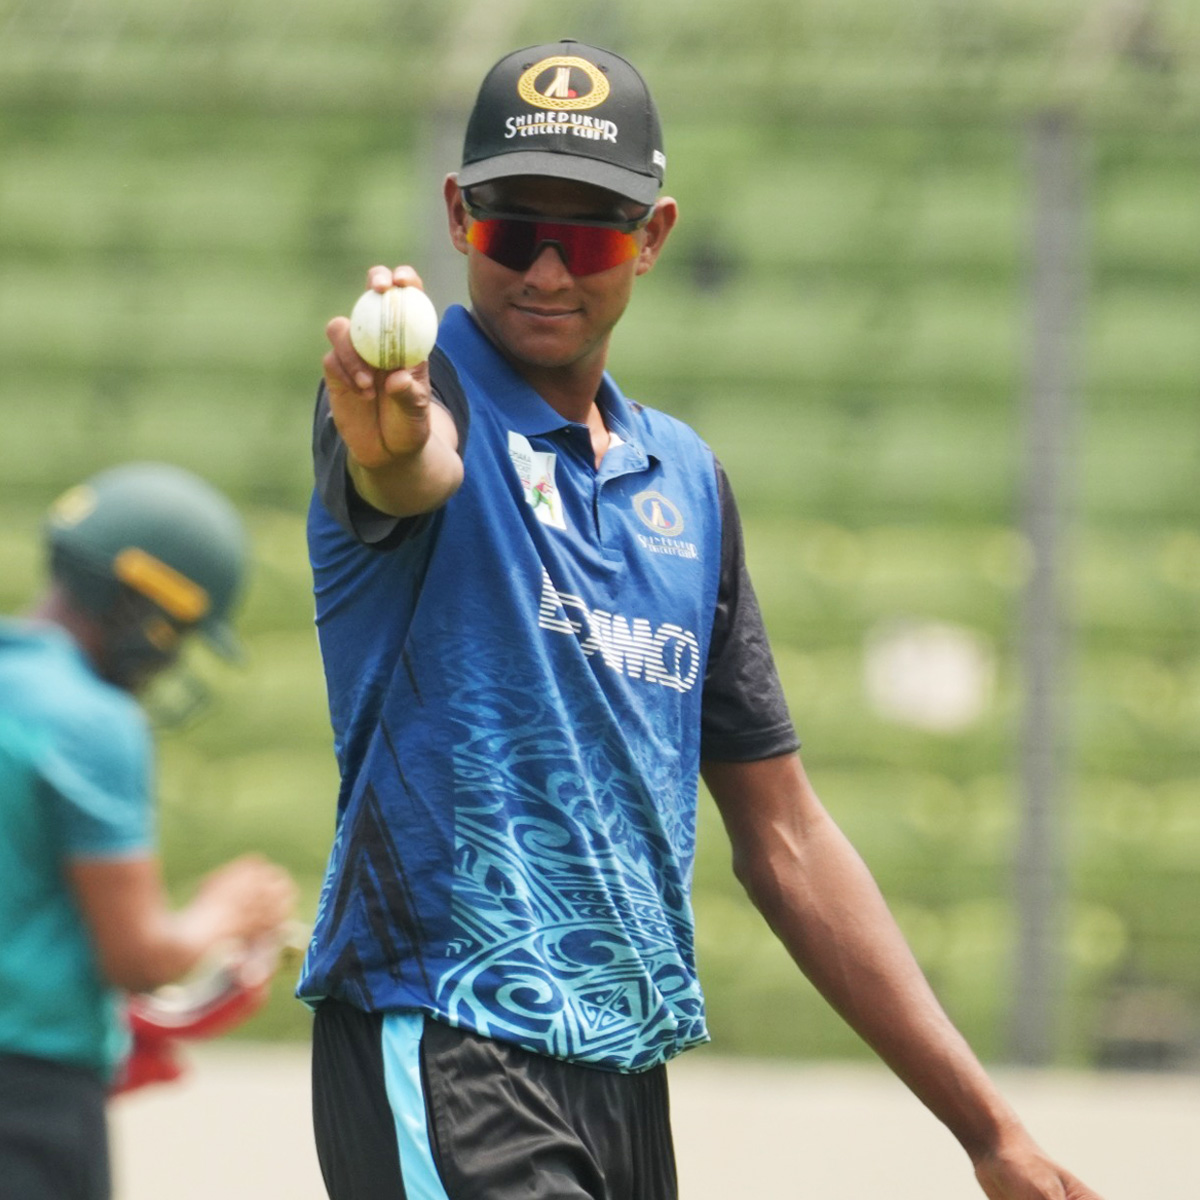 Fifer🔥 | 5/45
Pacer Nahid Rana of Shinepukur Cricket Club clinches a five-wicket haul against Mohammedan Sporting Club Ltd in the DPDCL 2024 at SBNCS, Mirpur.

#BCB #Cricket #DPDCL #BDCricket #LiveCricket #Bangladesh